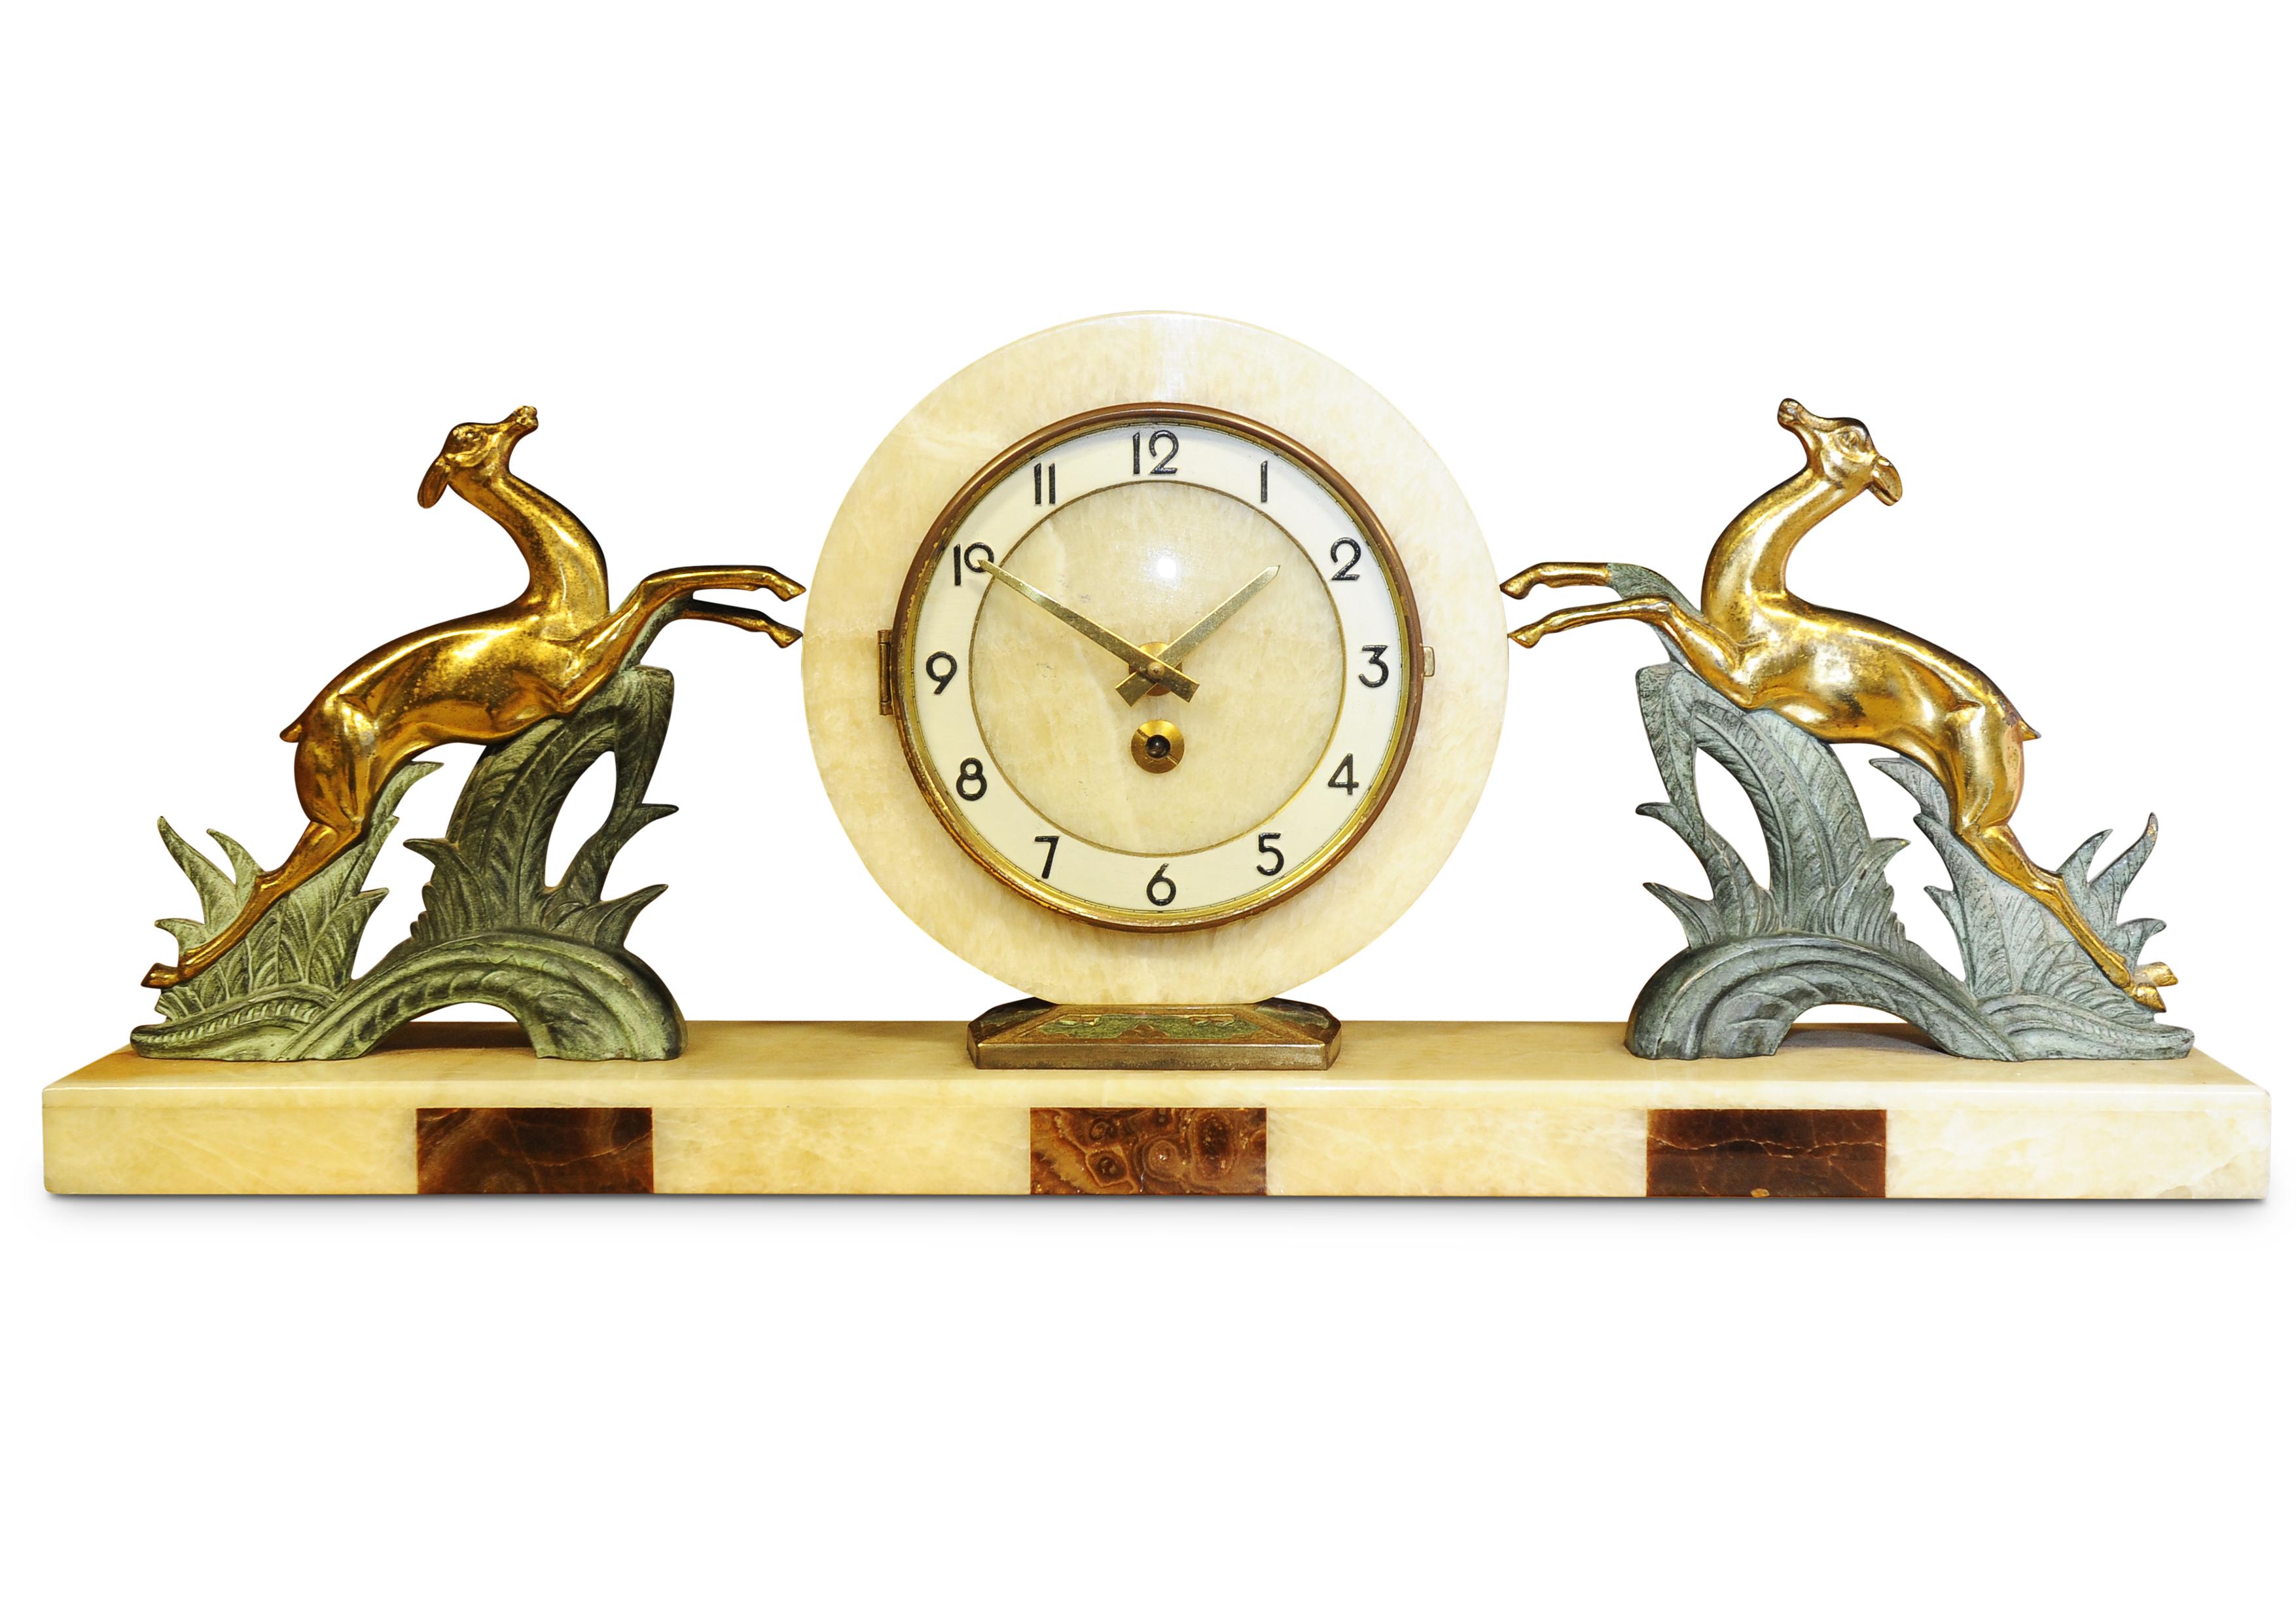 A fantastic example of a wonderful Art Deco Mantel Clock made of Marble, Spelter and Onyx by Albert Villon for Bayard from the 1930s 